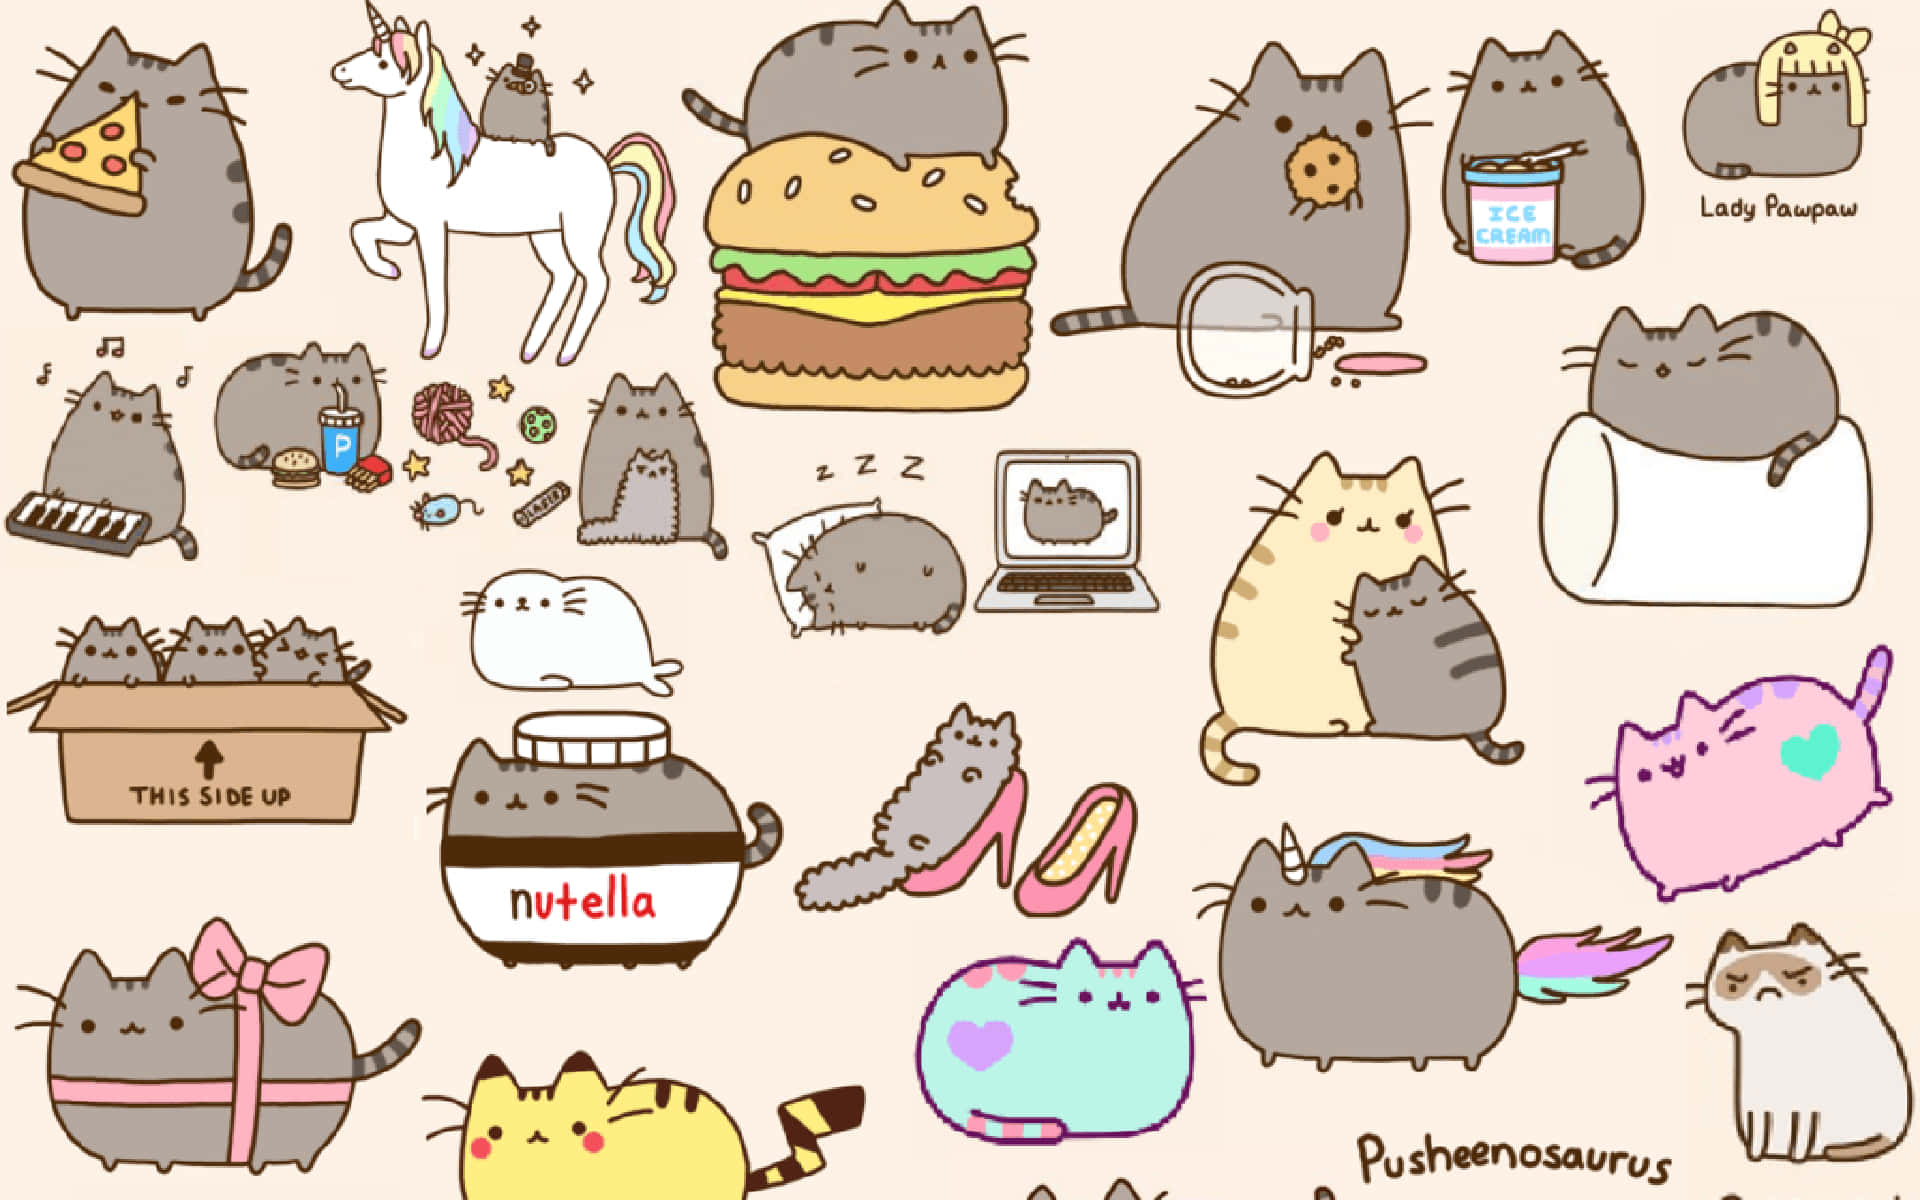 Download Soft and Adorable Pusheen the Cat Wallpaper